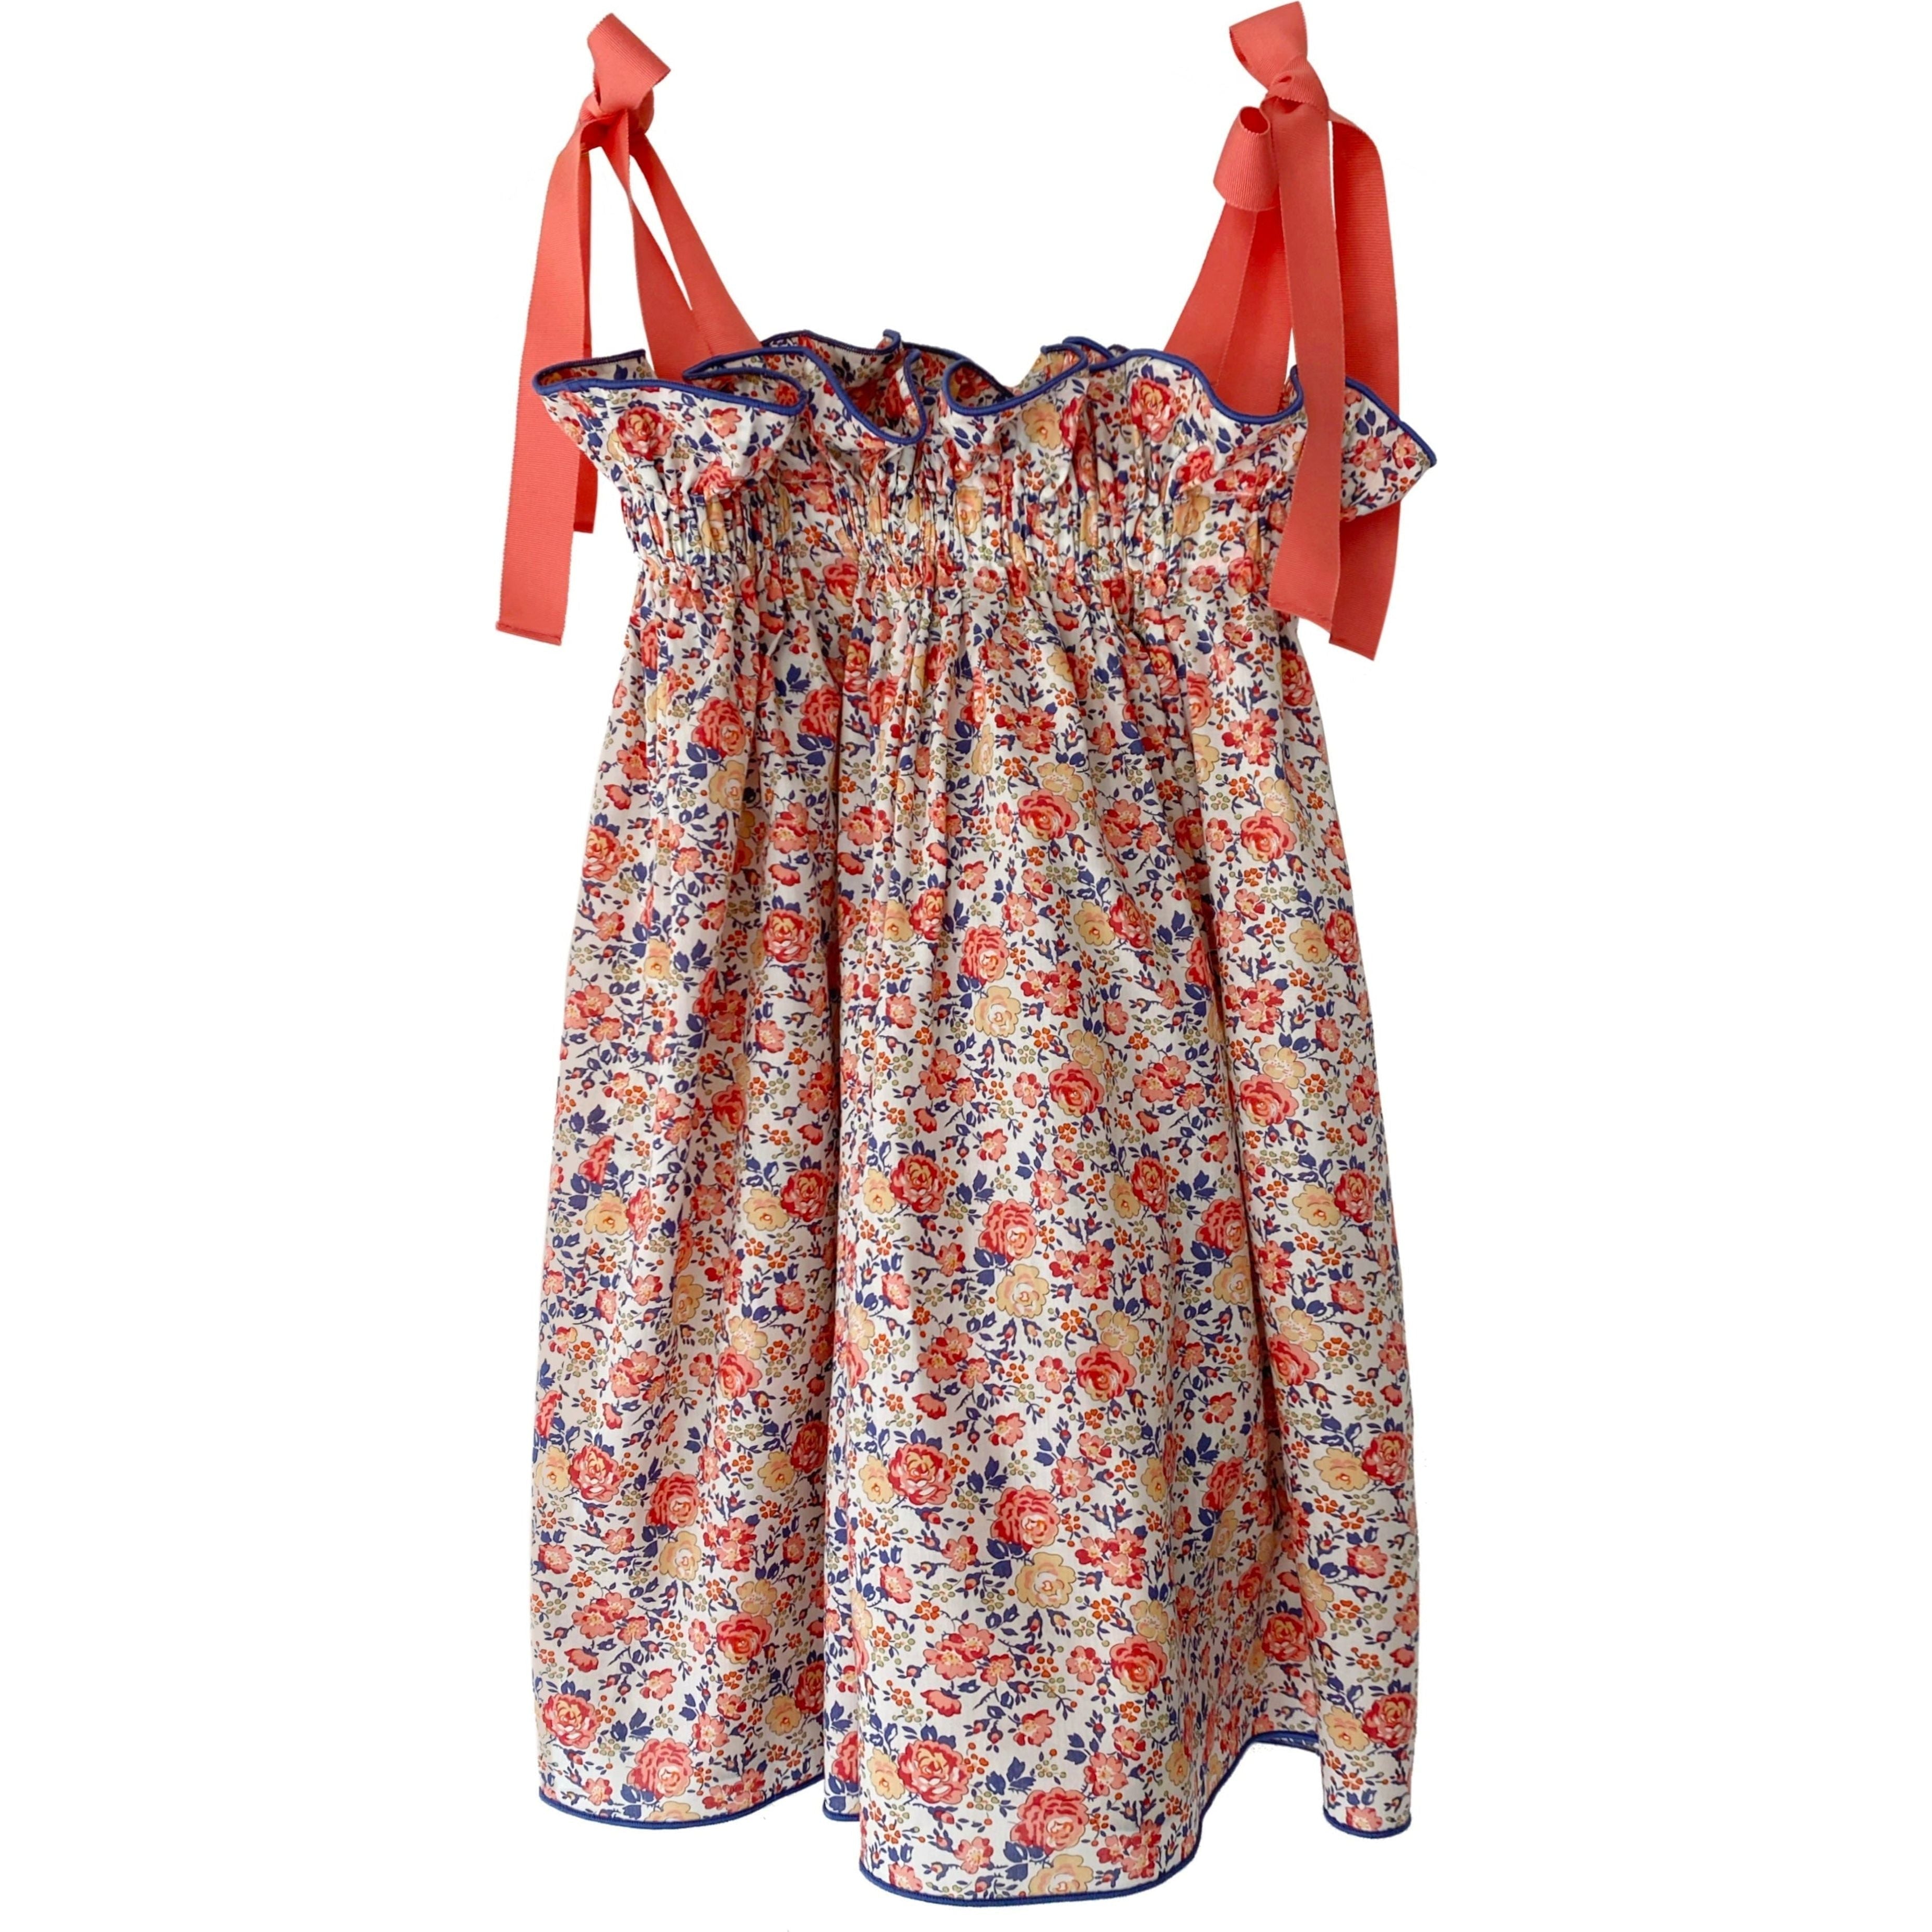 Girls' Jaime Dress in Coral Floral by Casey Marks